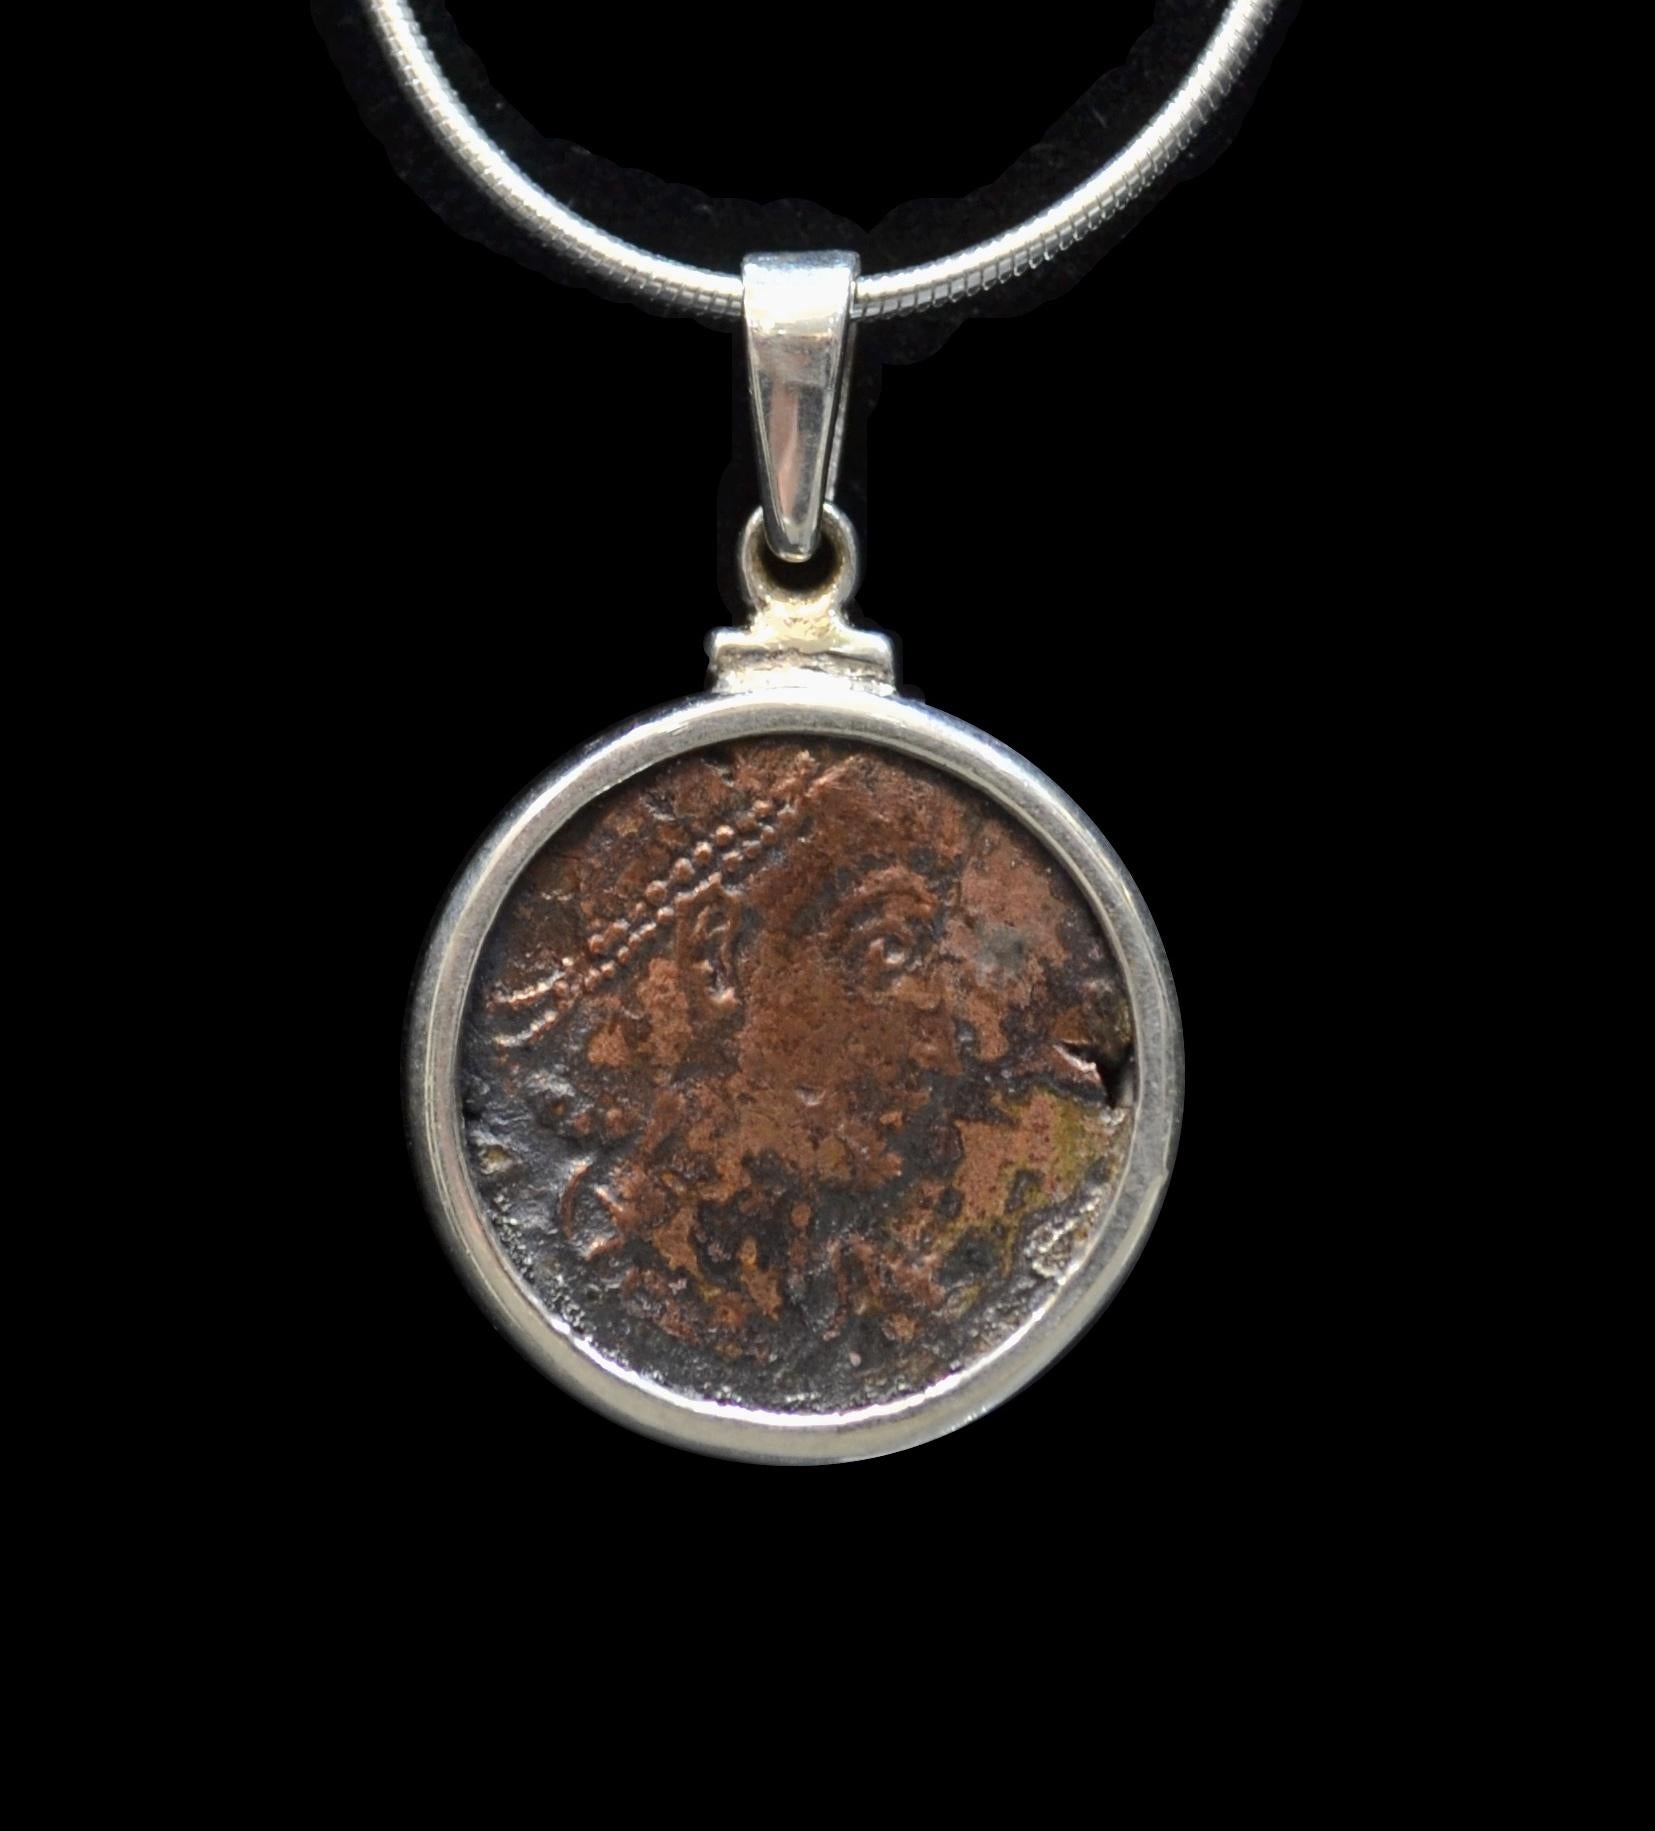 Antique Constantine The Great copper coin mounted on contemporary silver necklace. Ready to be worn!

Constantine was the son of Flavius Valerius Constantius, a Roman Army officer, and his consort Helena. He built Constantinople, created a new gold